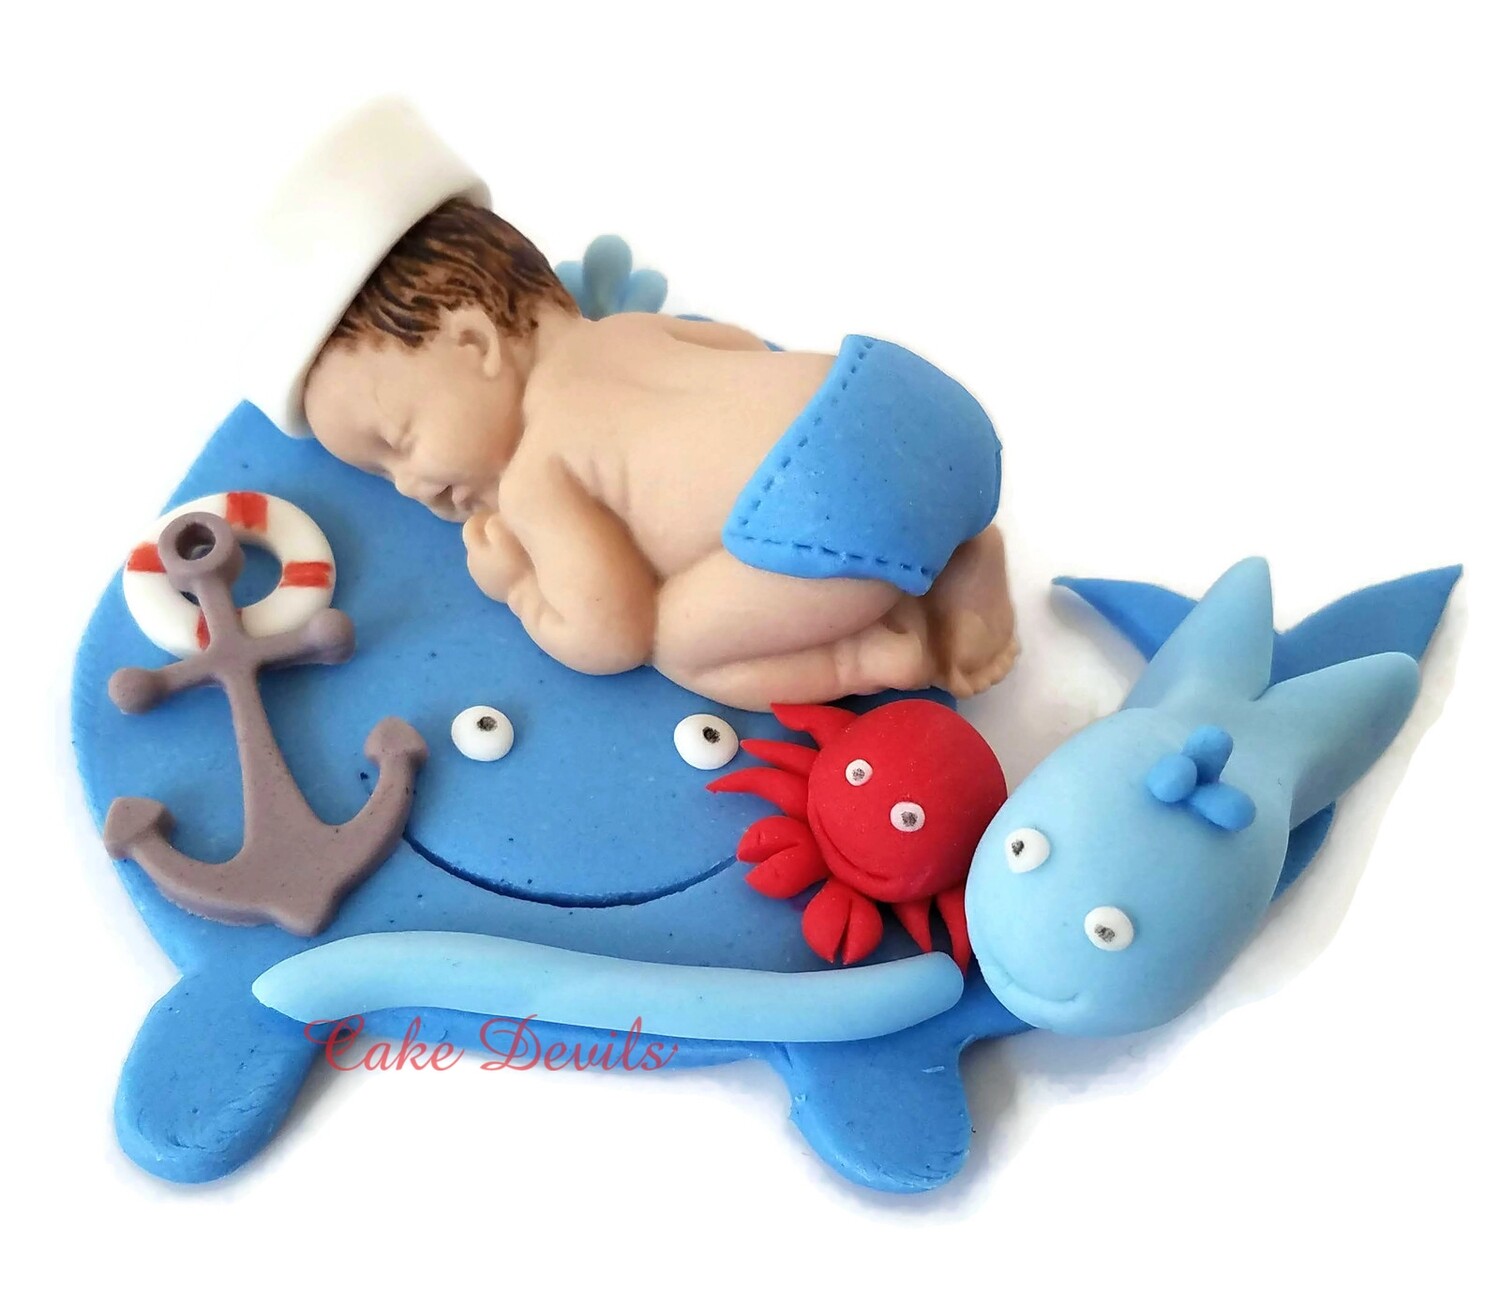 Whale Baby Shower Fondant Sleeping Baby Cake Topper for Ocean, Sea, Nautical, or Sailor baby shower